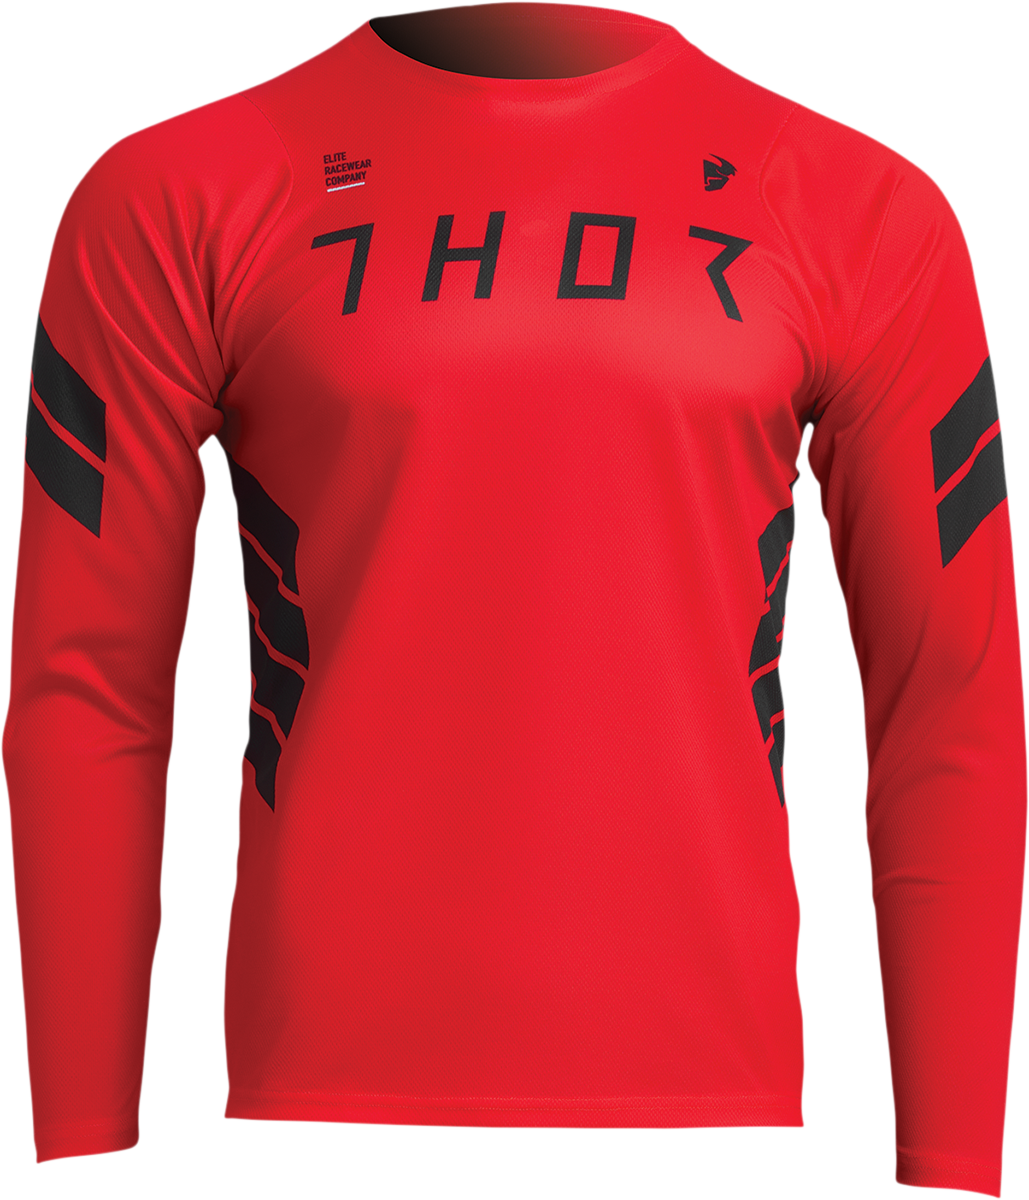 THOR Assist Sting Long-Sleeve Jersey - Red - Small 5020-0032